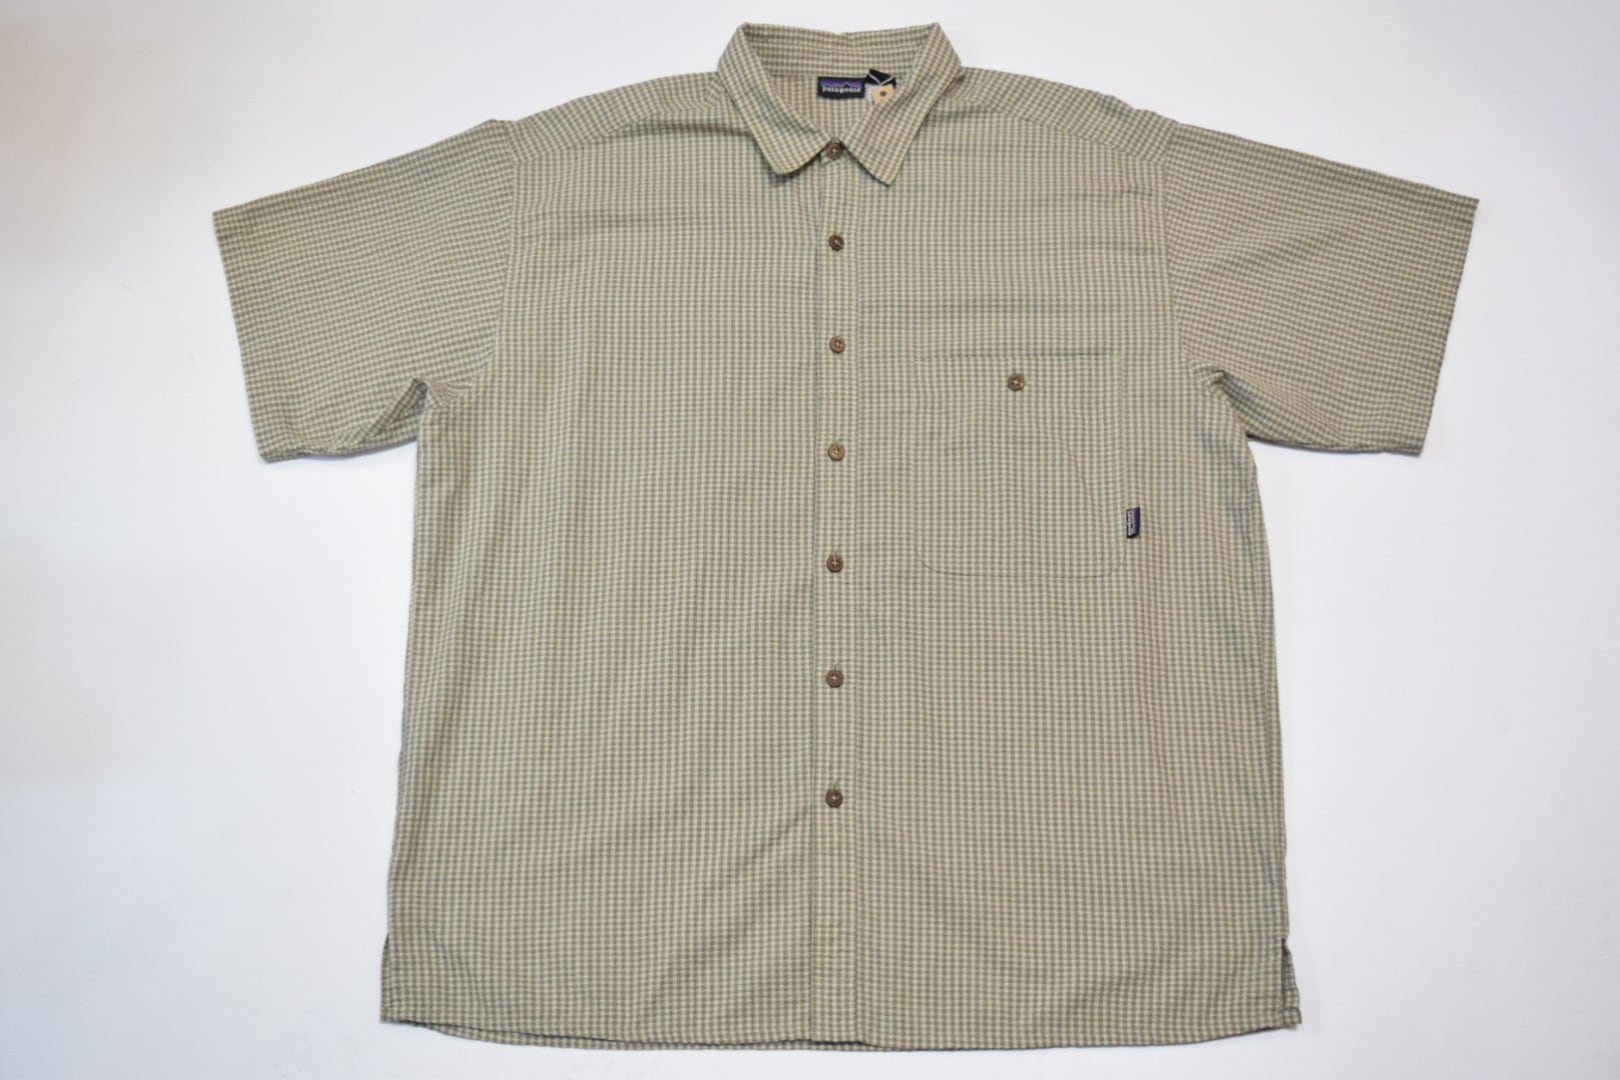 USED 00s patagonia S/S Packer wear shirt -Large 01569